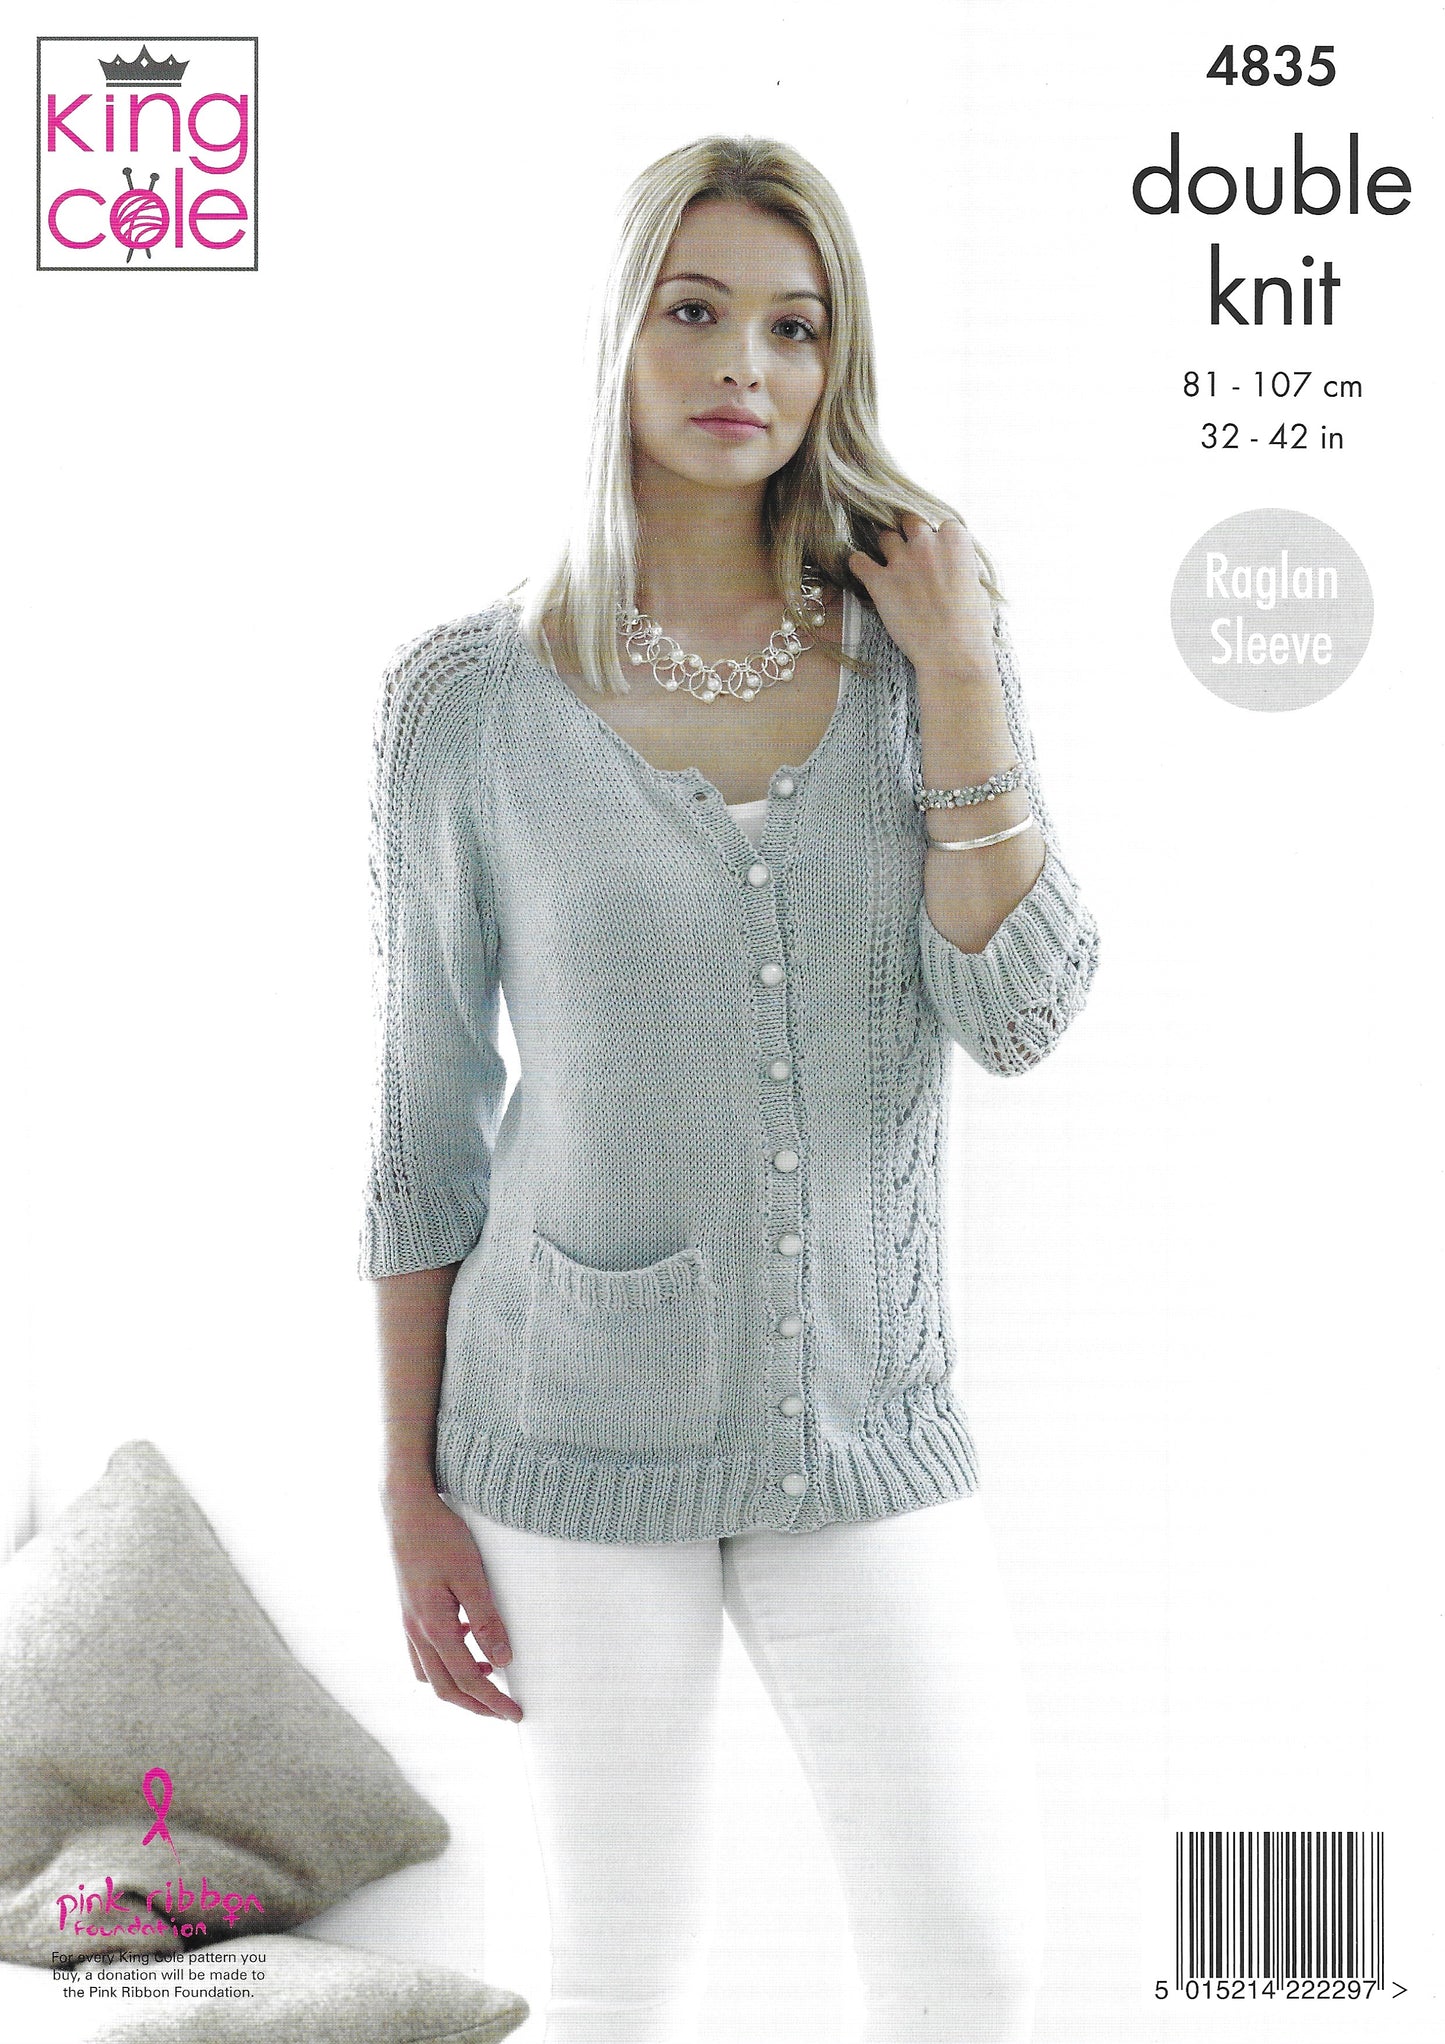 King Cole 4835 Ladies Sweater and Cardigan DK Knitting Pattern